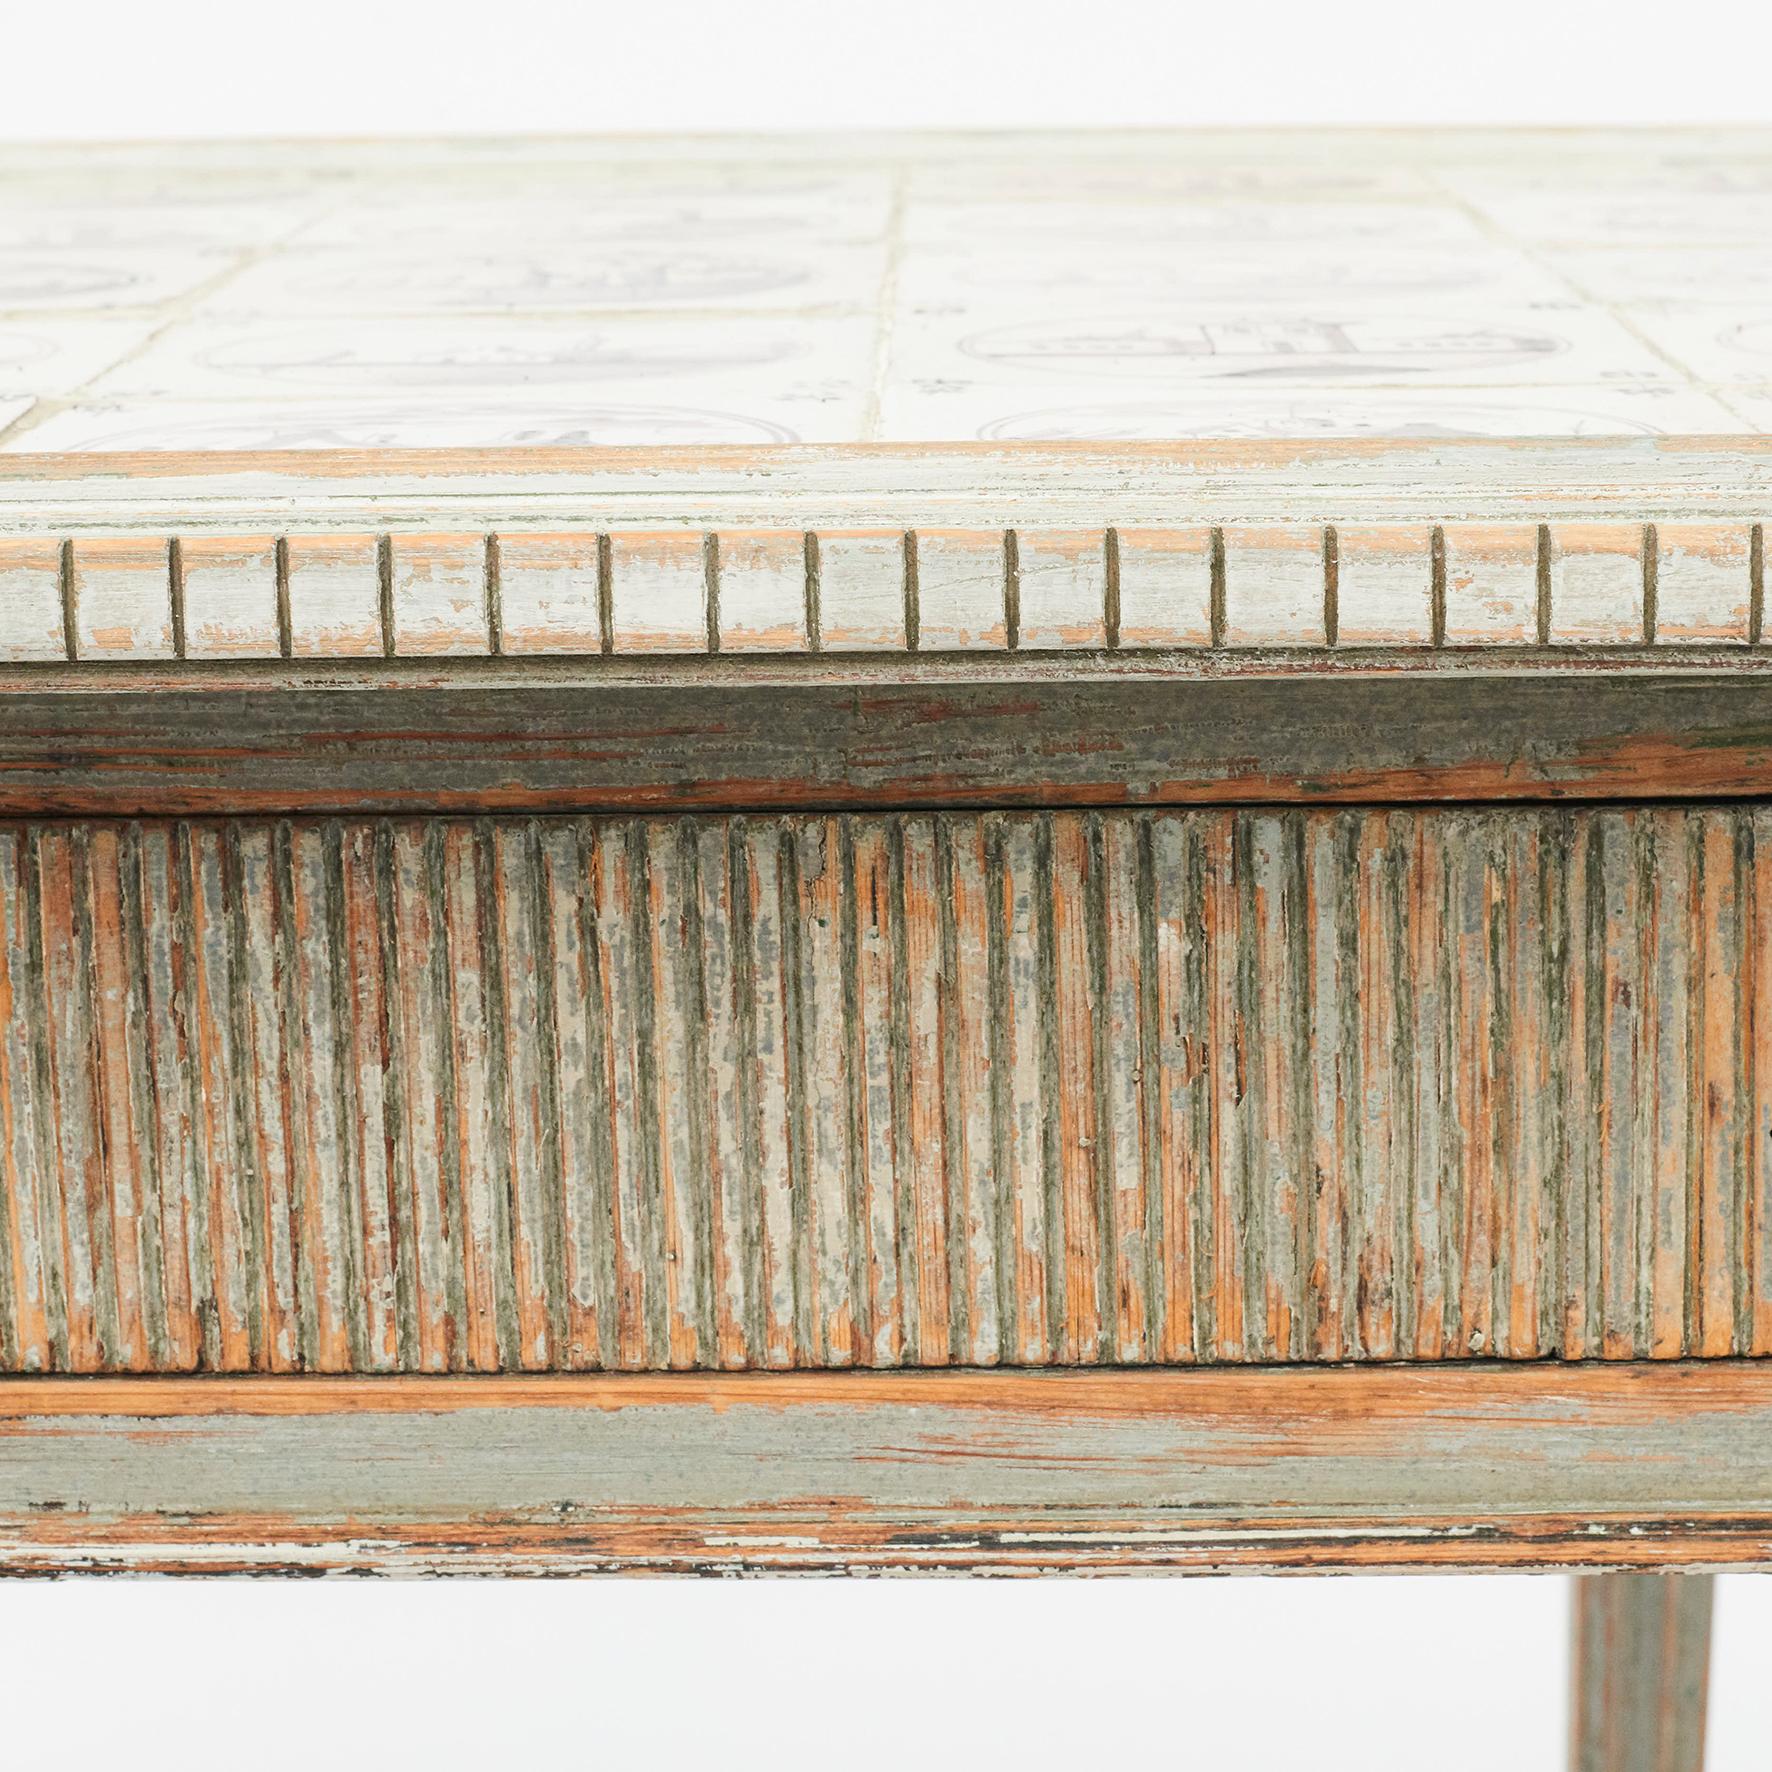 Ceramic Late 18th Century Danish Louis XVI Table with Dutch Decorated Tiles